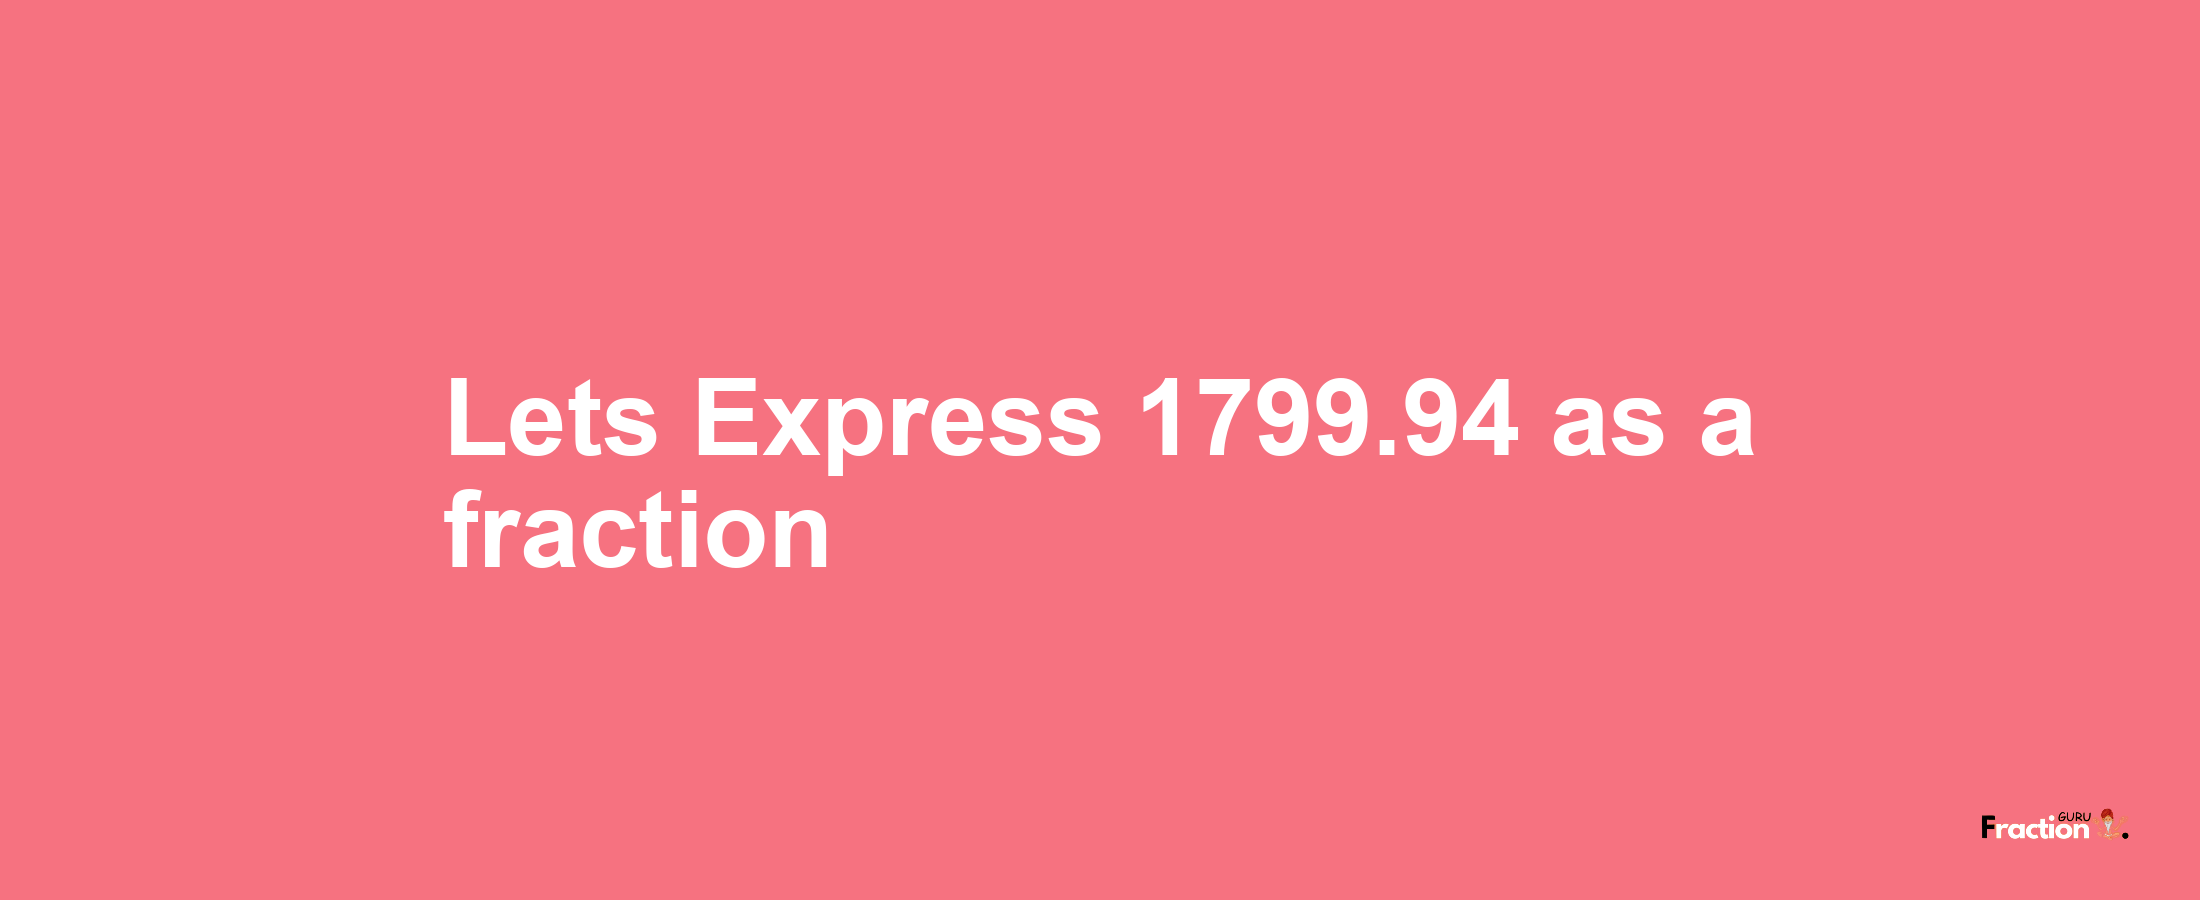 Lets Express 1799.94 as afraction